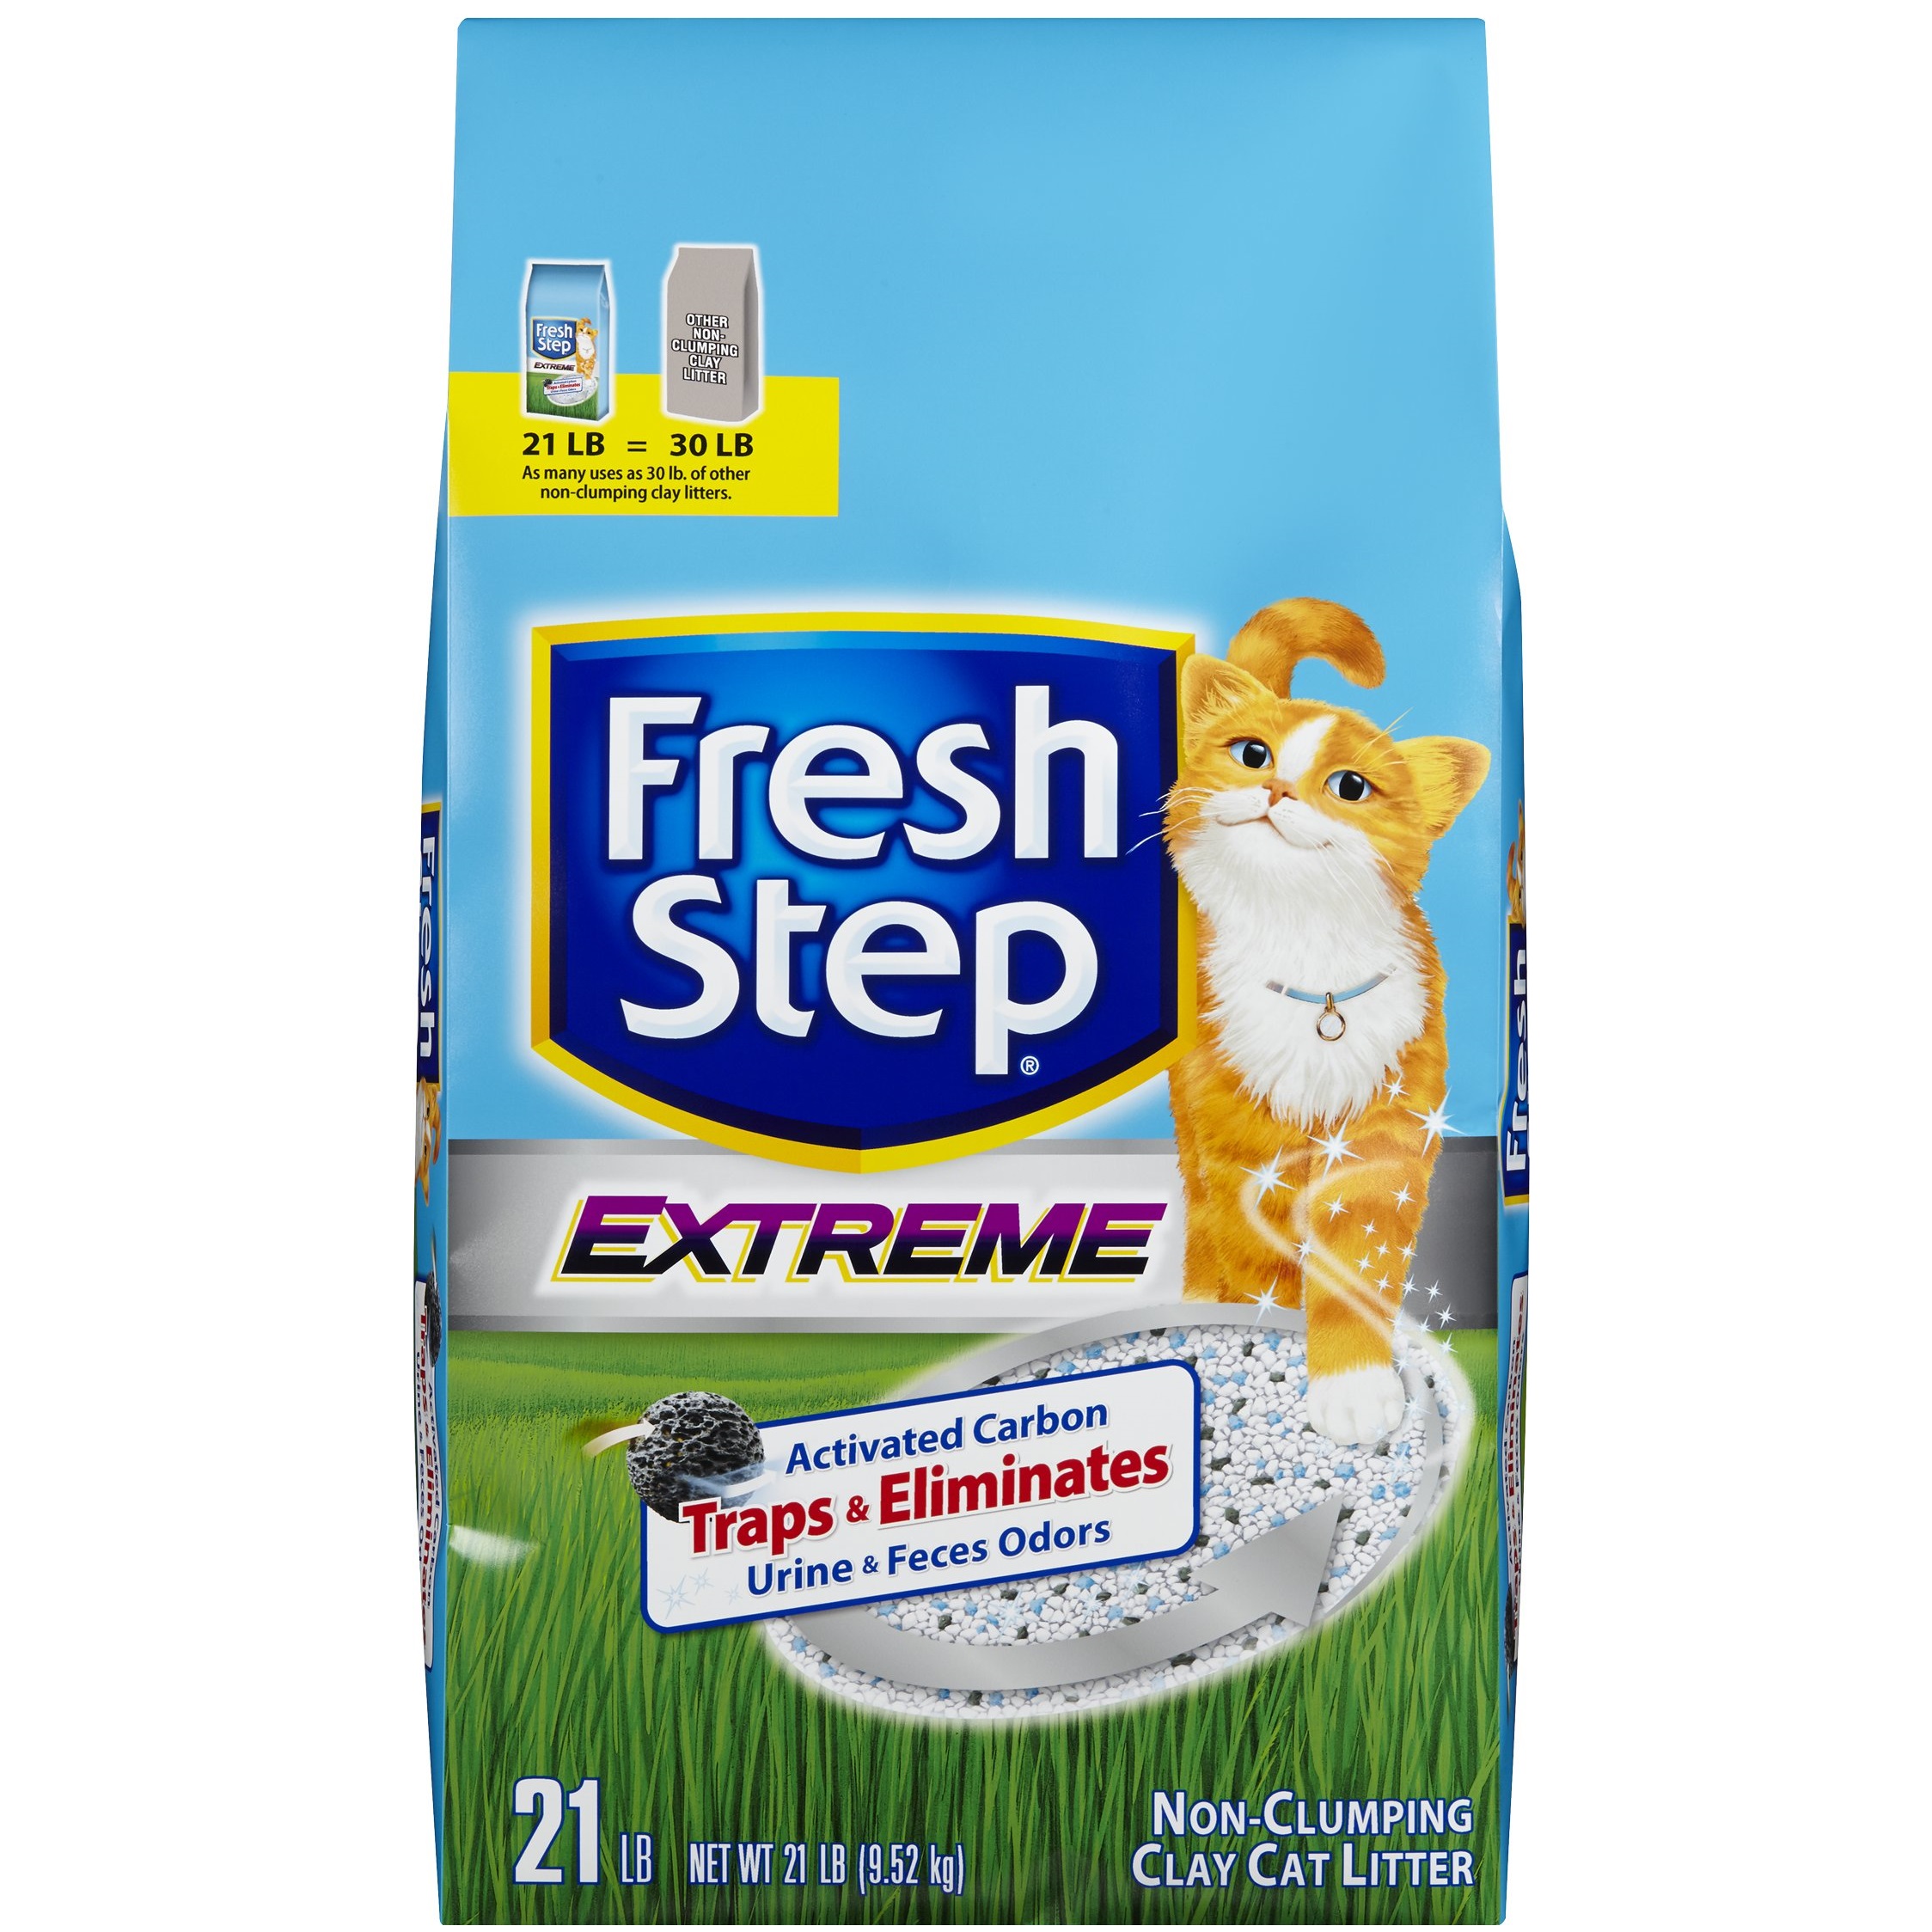 Fresh Step Clay Cat Litter, Value Size, 21 lbs (9.52 kg)